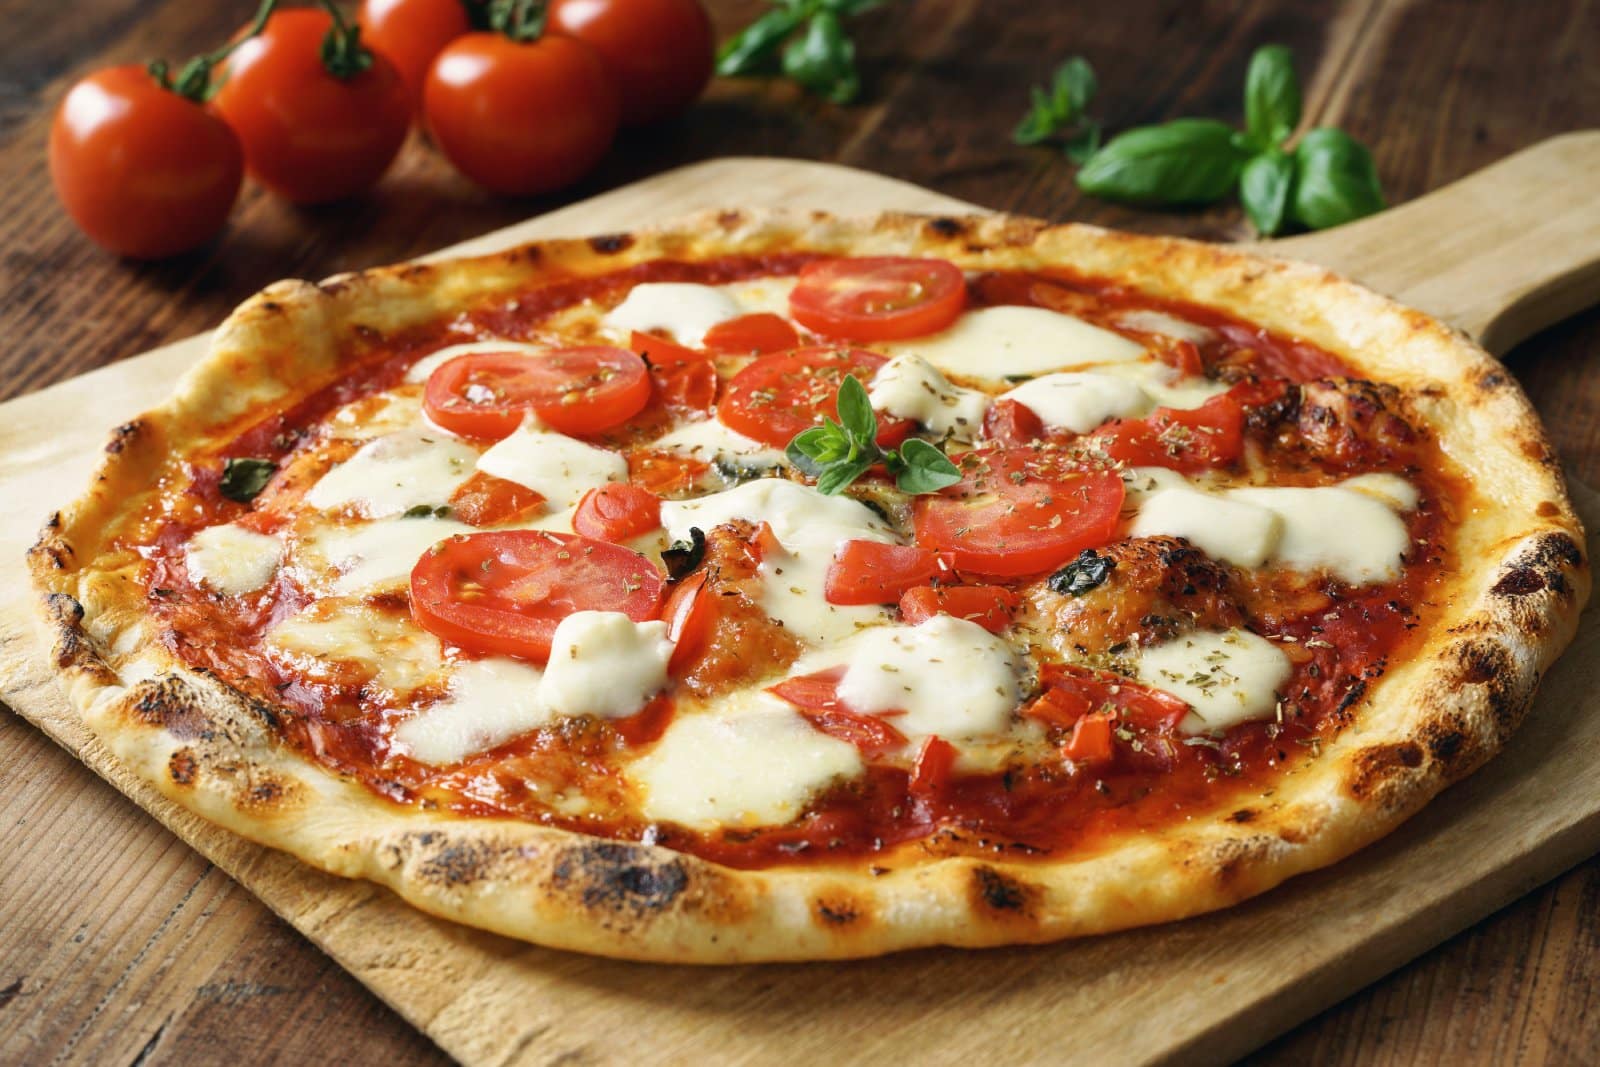 Image Credit: Shutterstock / V. Matthiesen <p>Experience the simplicity and elegance of true Italian pizza with a soft, chewy crust, fresh tomato sauce, mozzarella, and basil.</p>